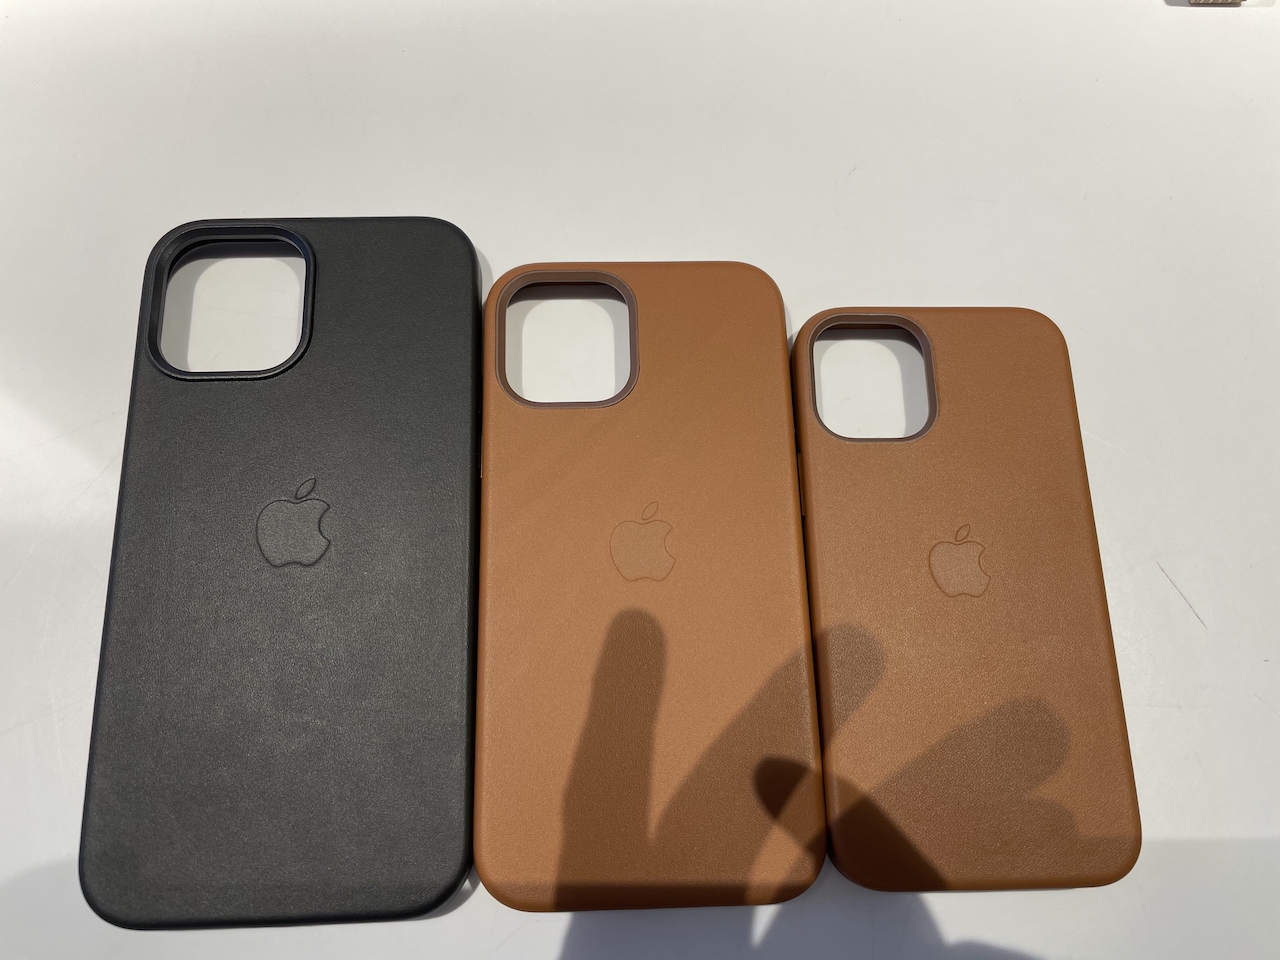 Apple reportedly won't make leather cases for the iPhone 15 - The